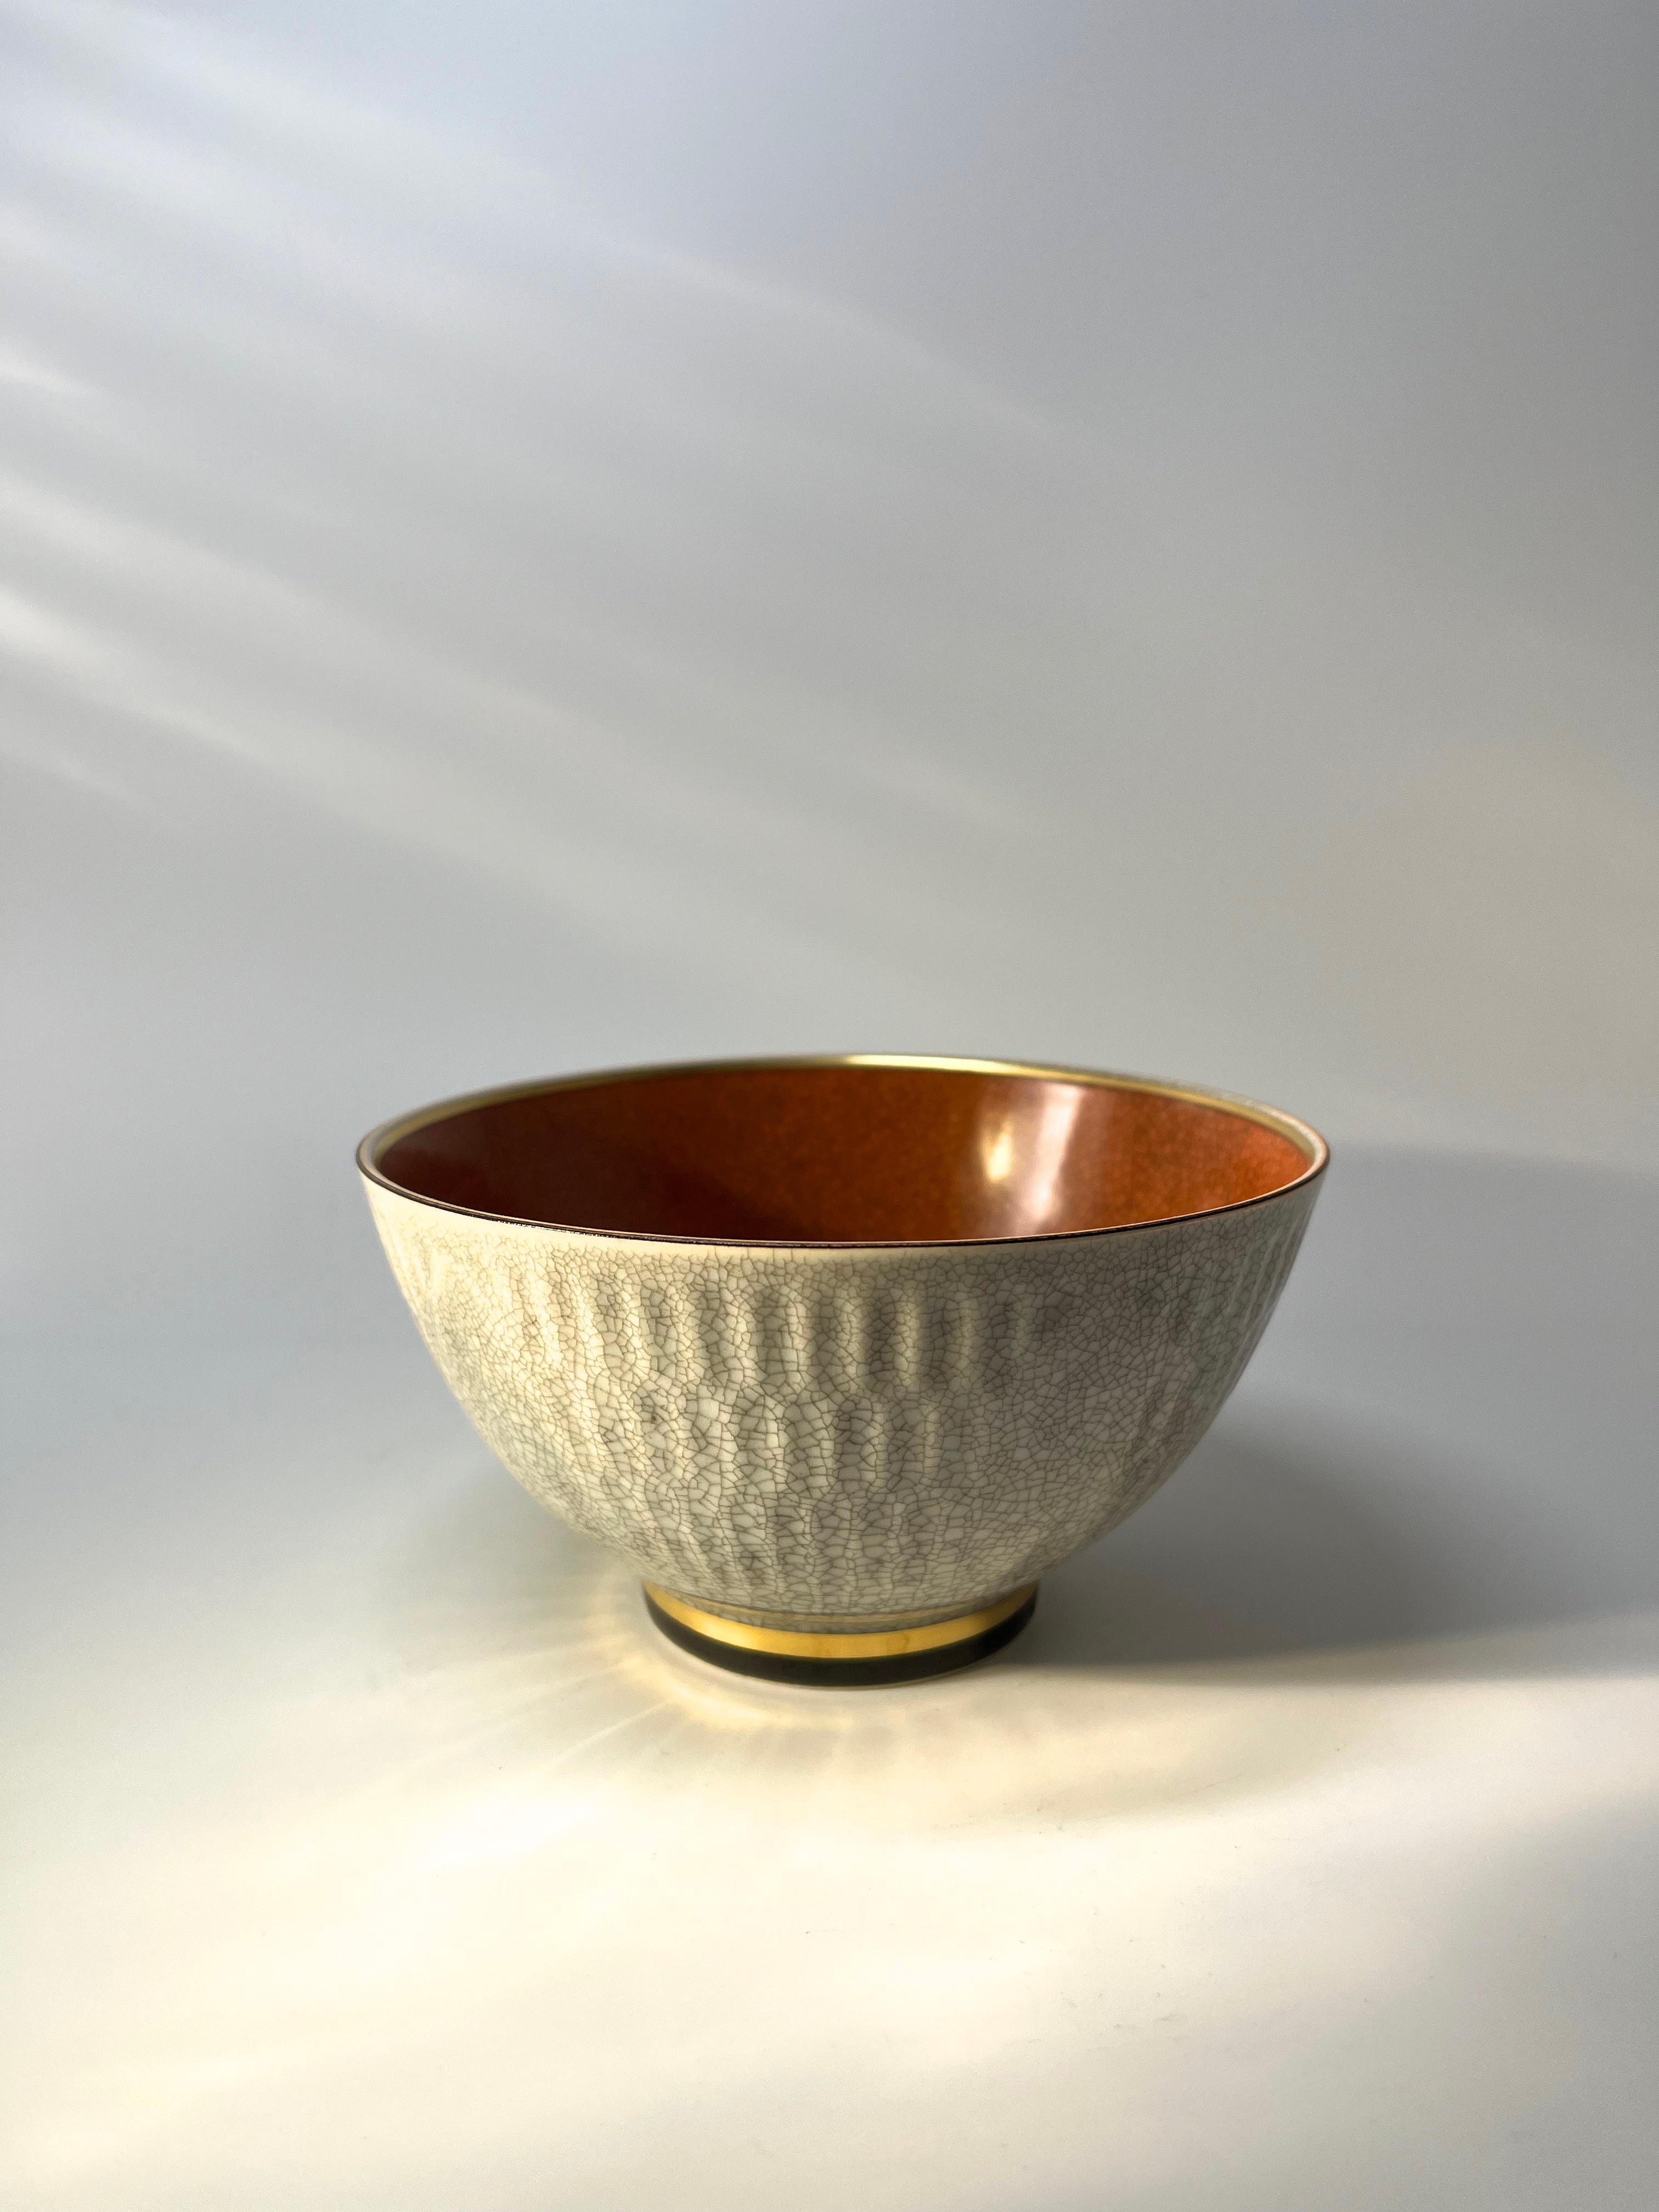 Thorkild Olsen For Royal Copenhagen Terracotta Crackle Glazed Bowl #3431 In Excellent Condition For Sale In Rothley, Leicestershire